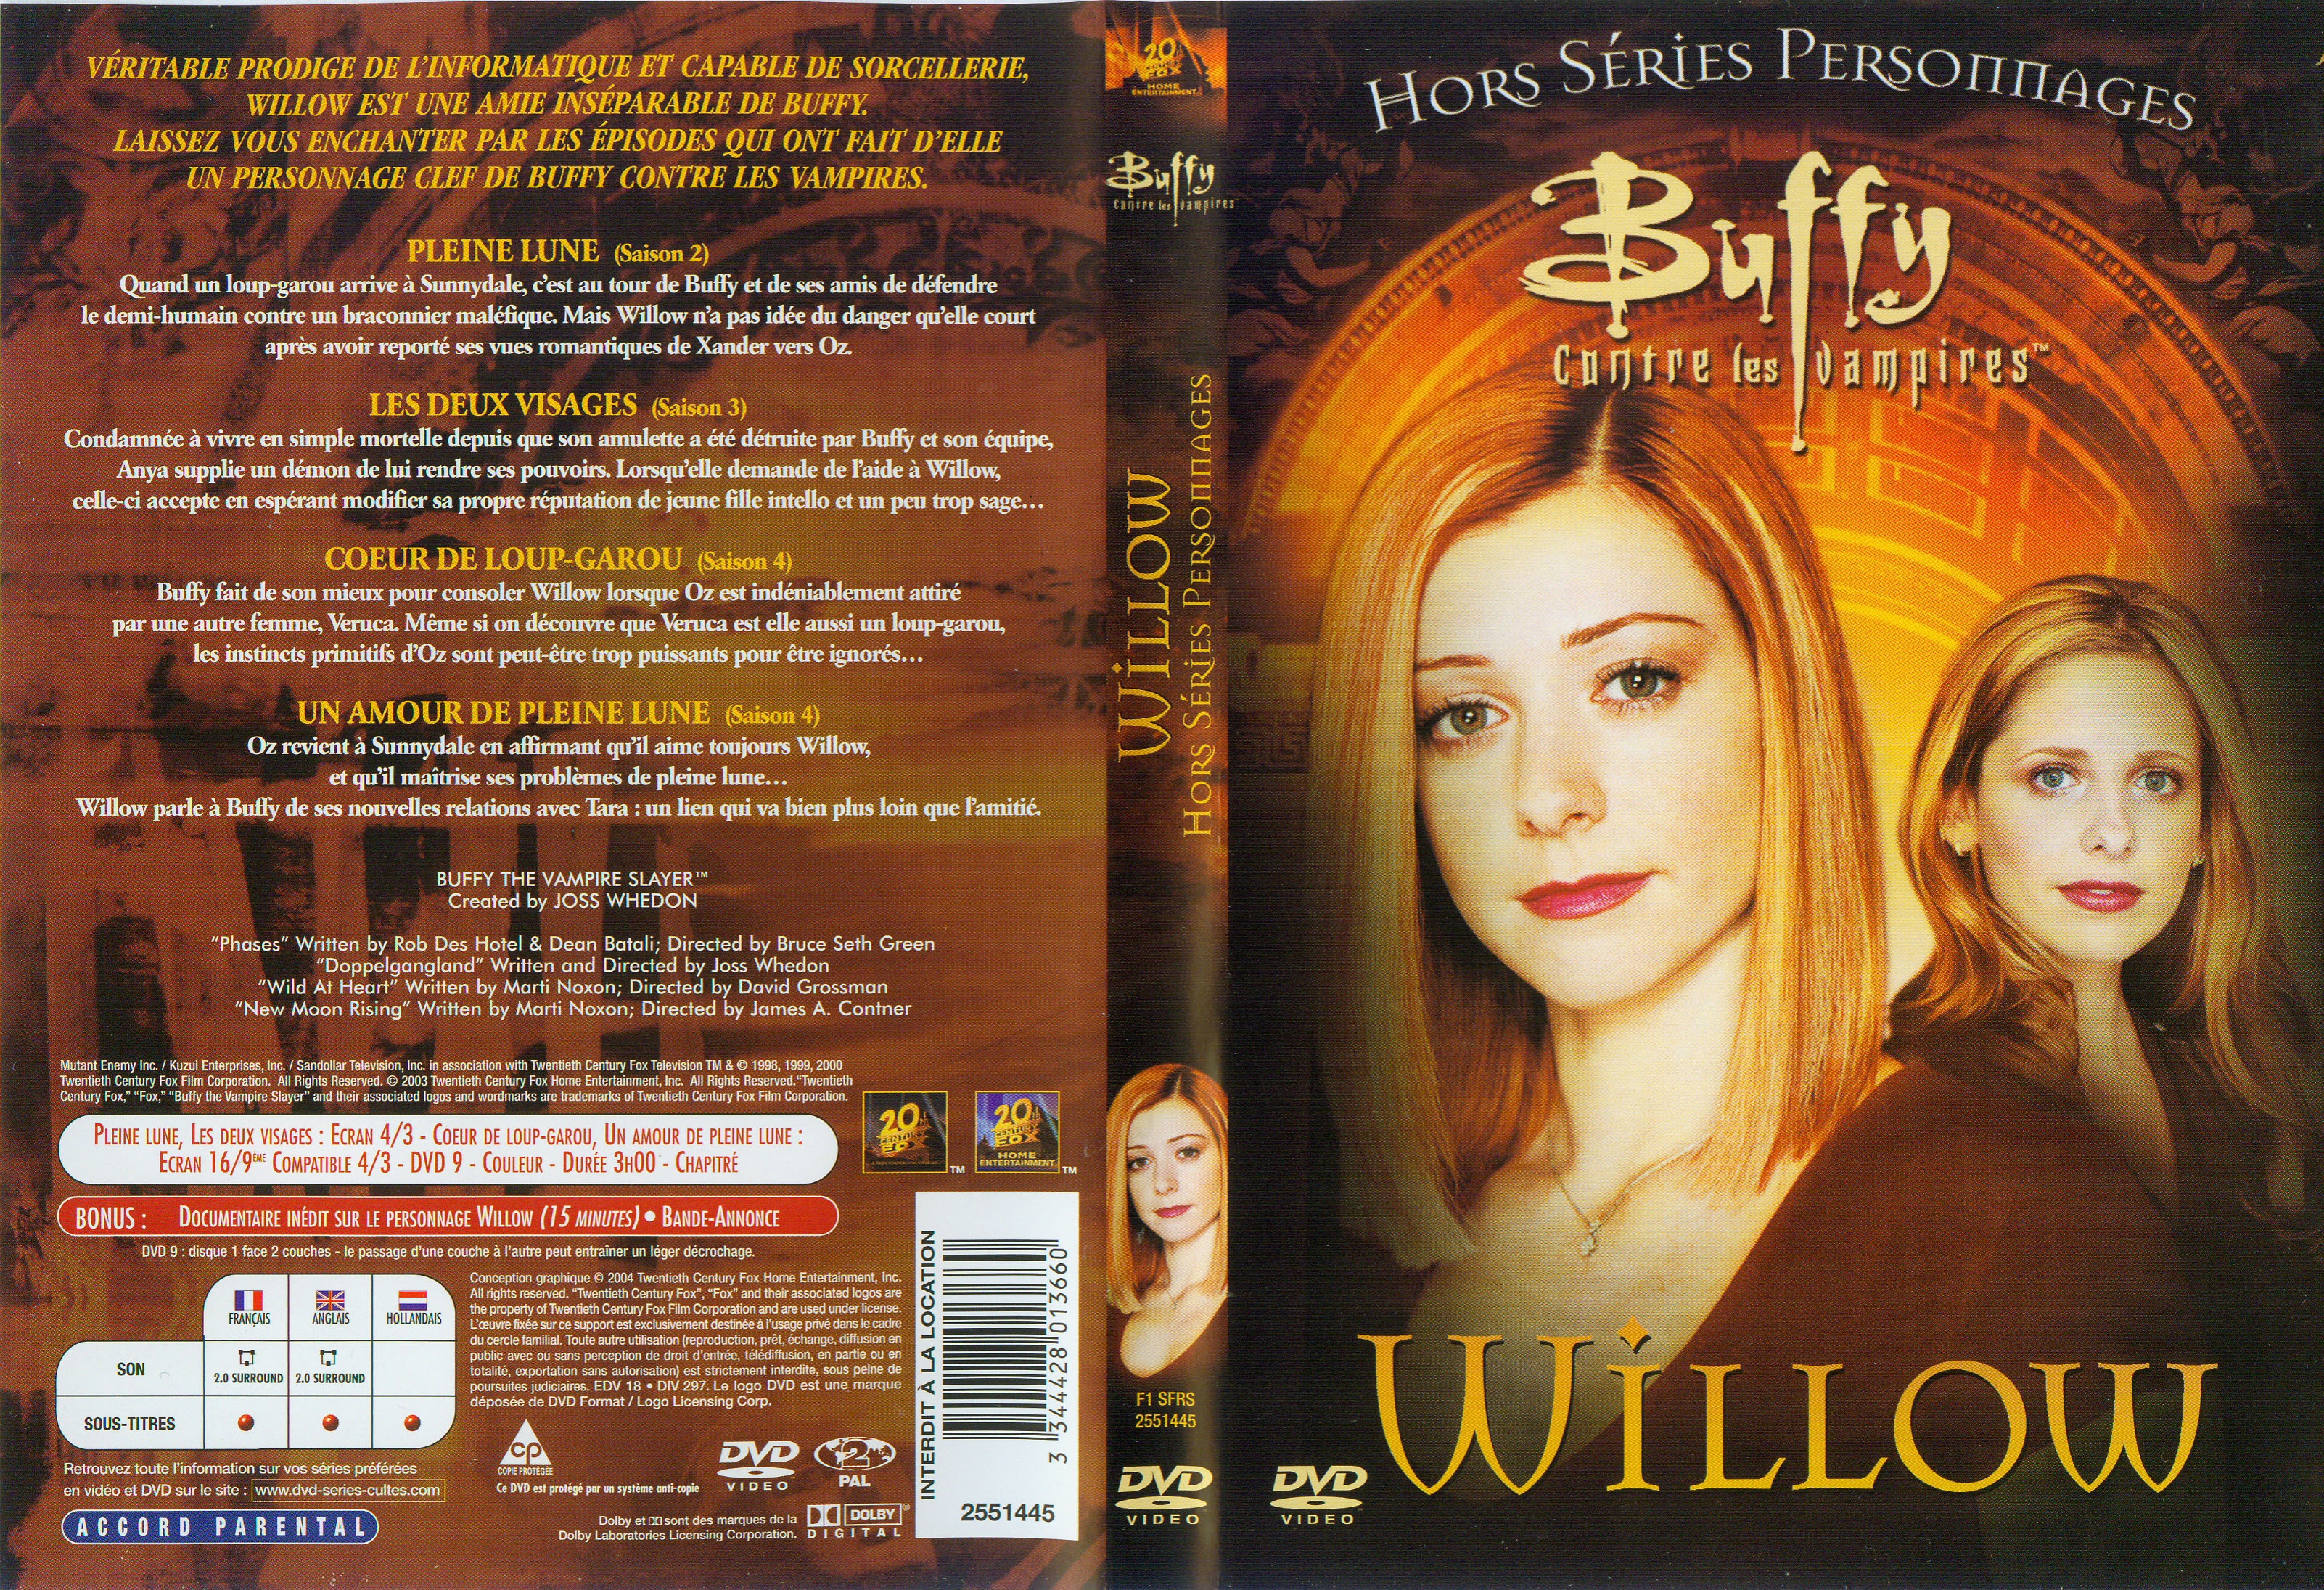 Jaquette DVD Buffy contre les vampires Special Willow